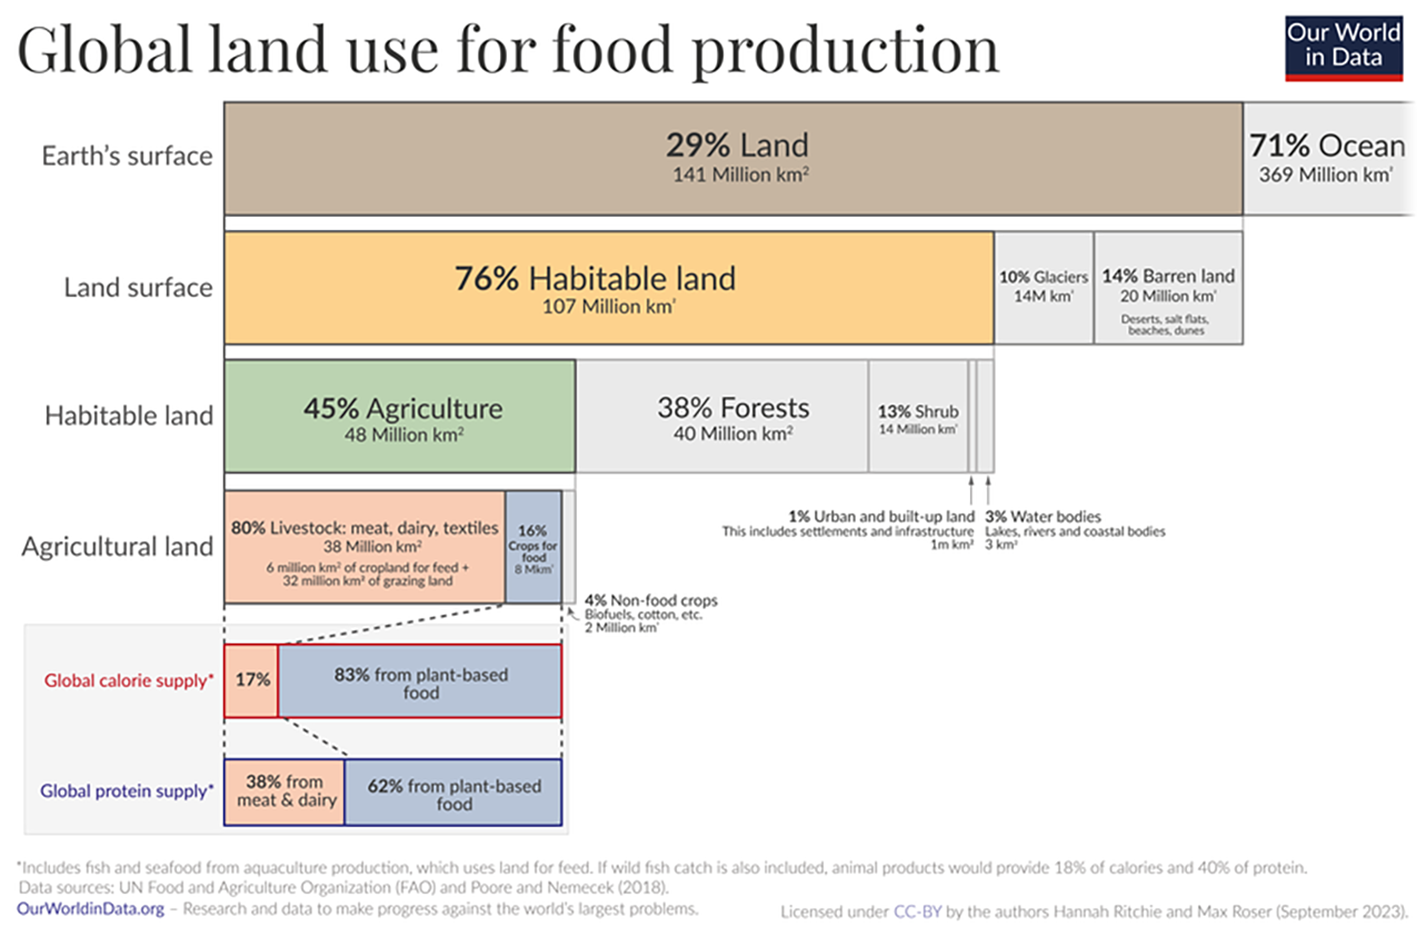 Global land use for production